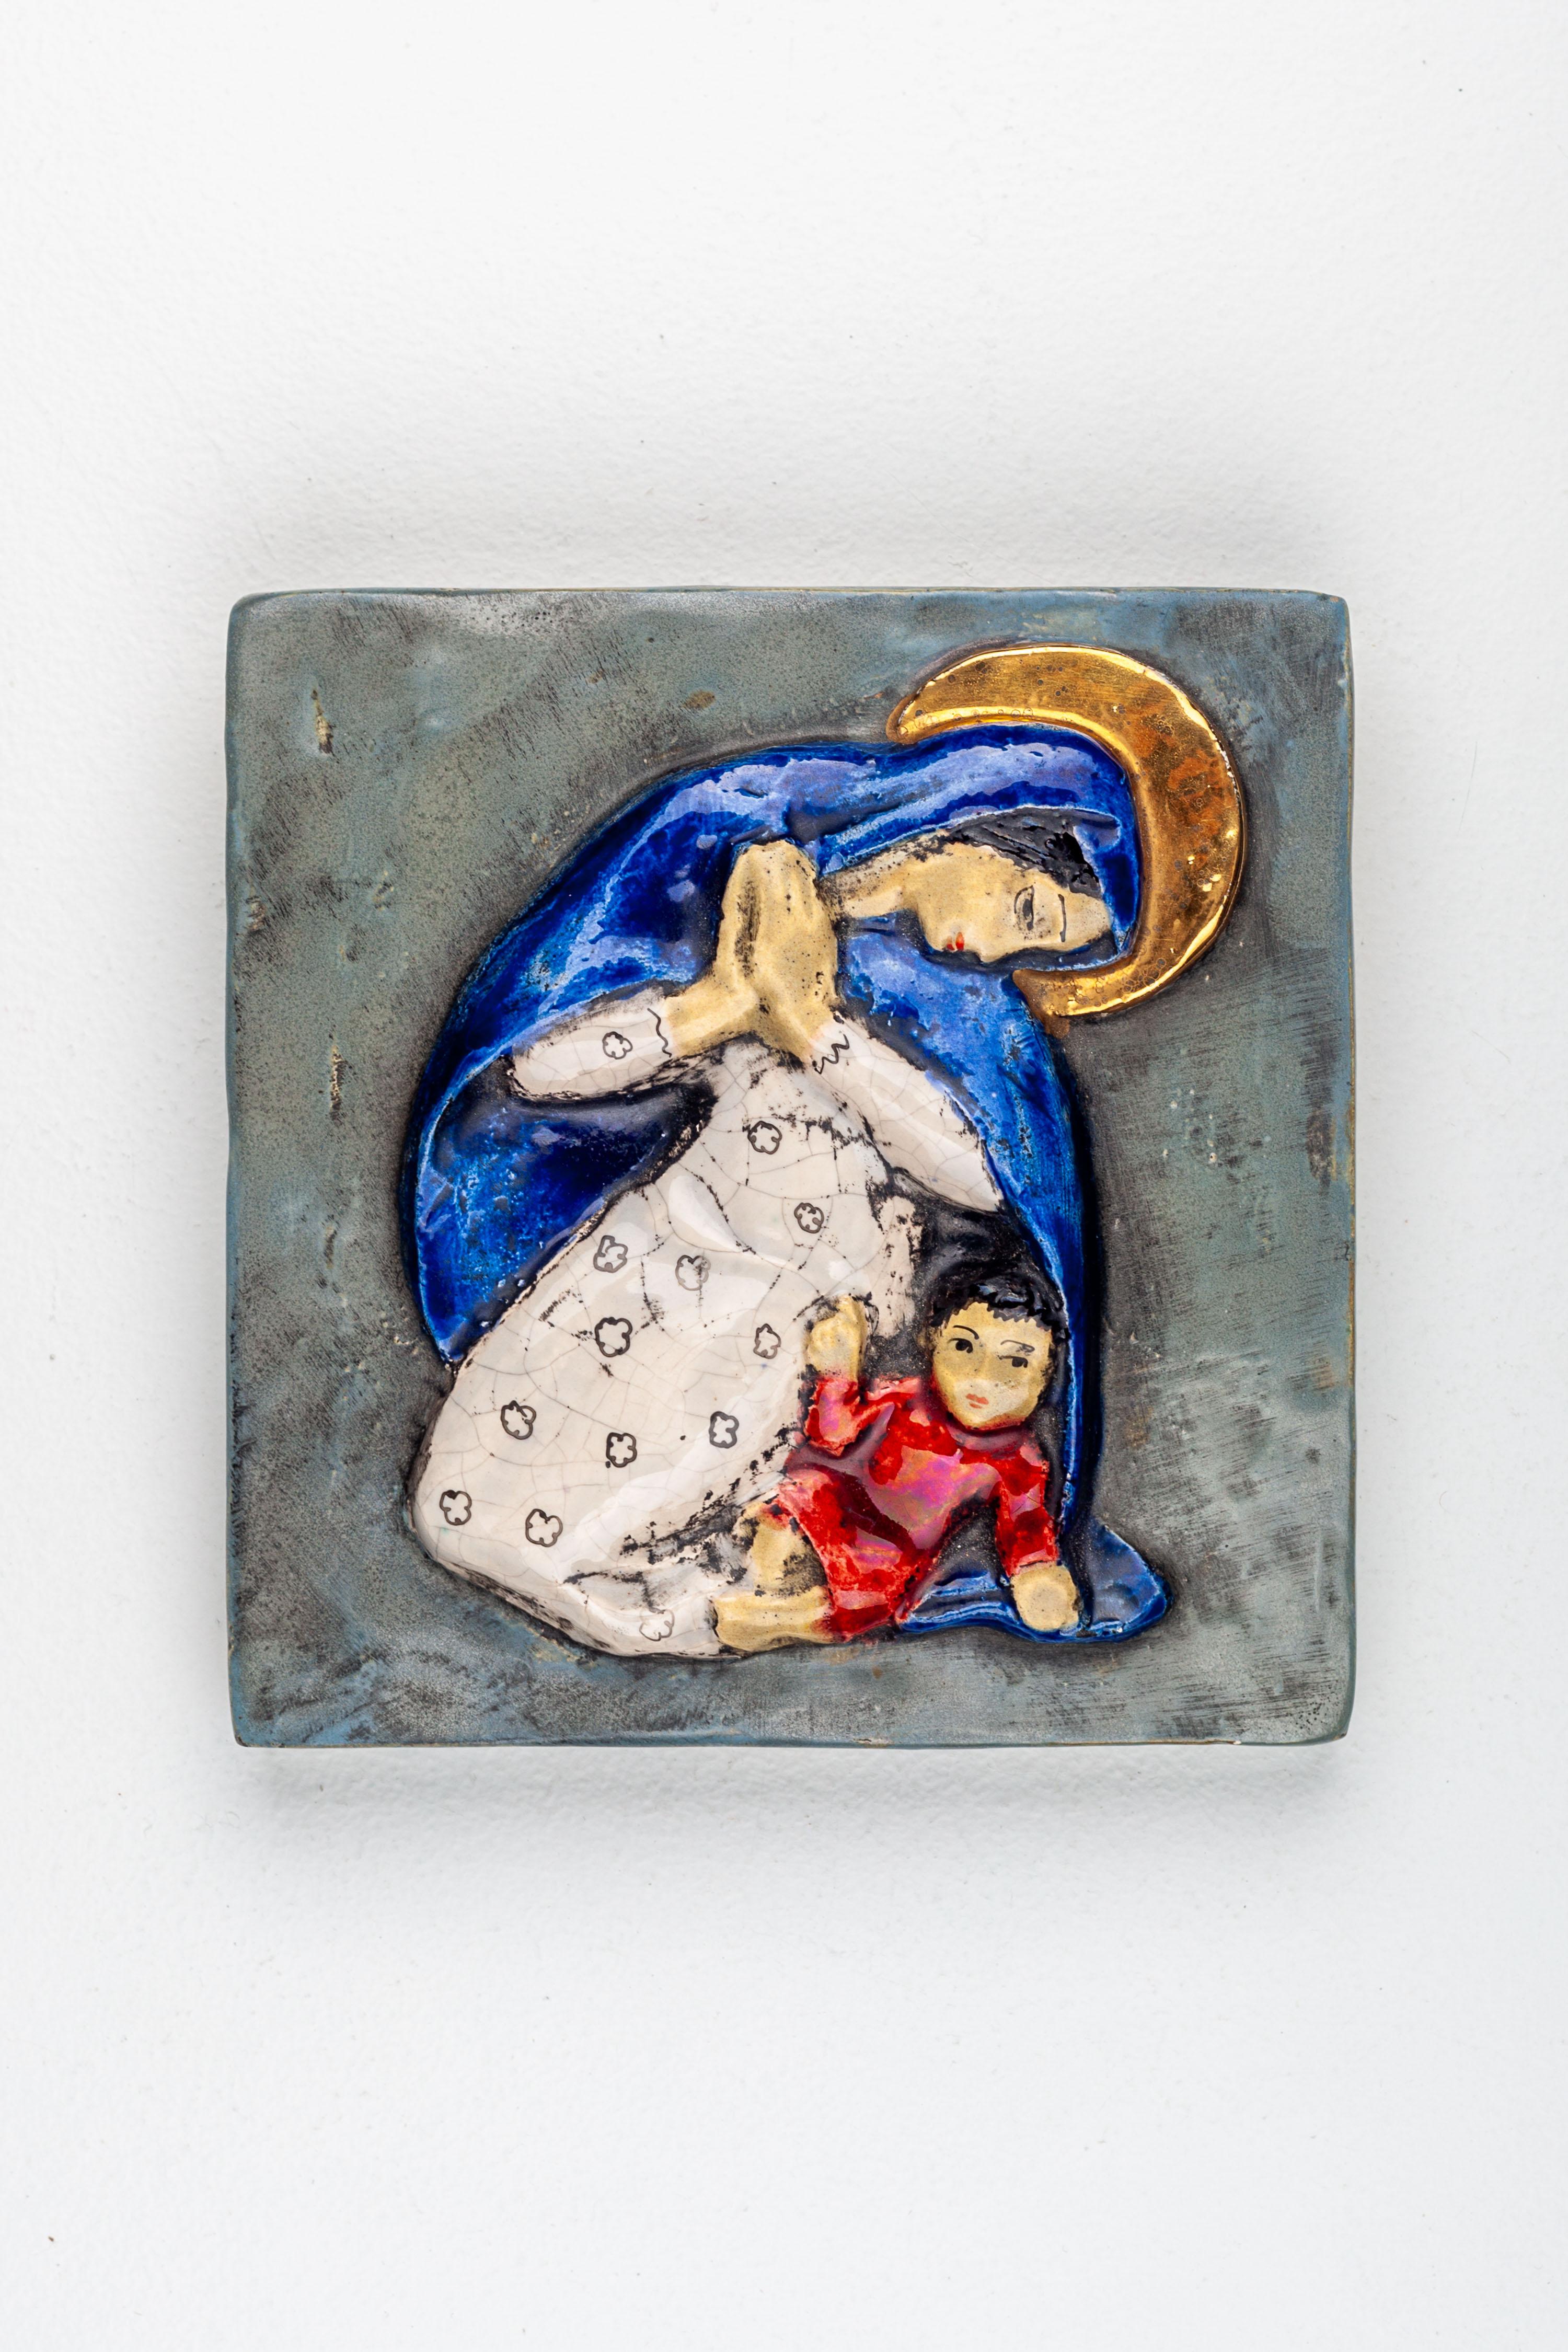 European Modernist Virgin Mary and Child Jesus Wall Ceramic Decoration Handmade in Europe For Sale